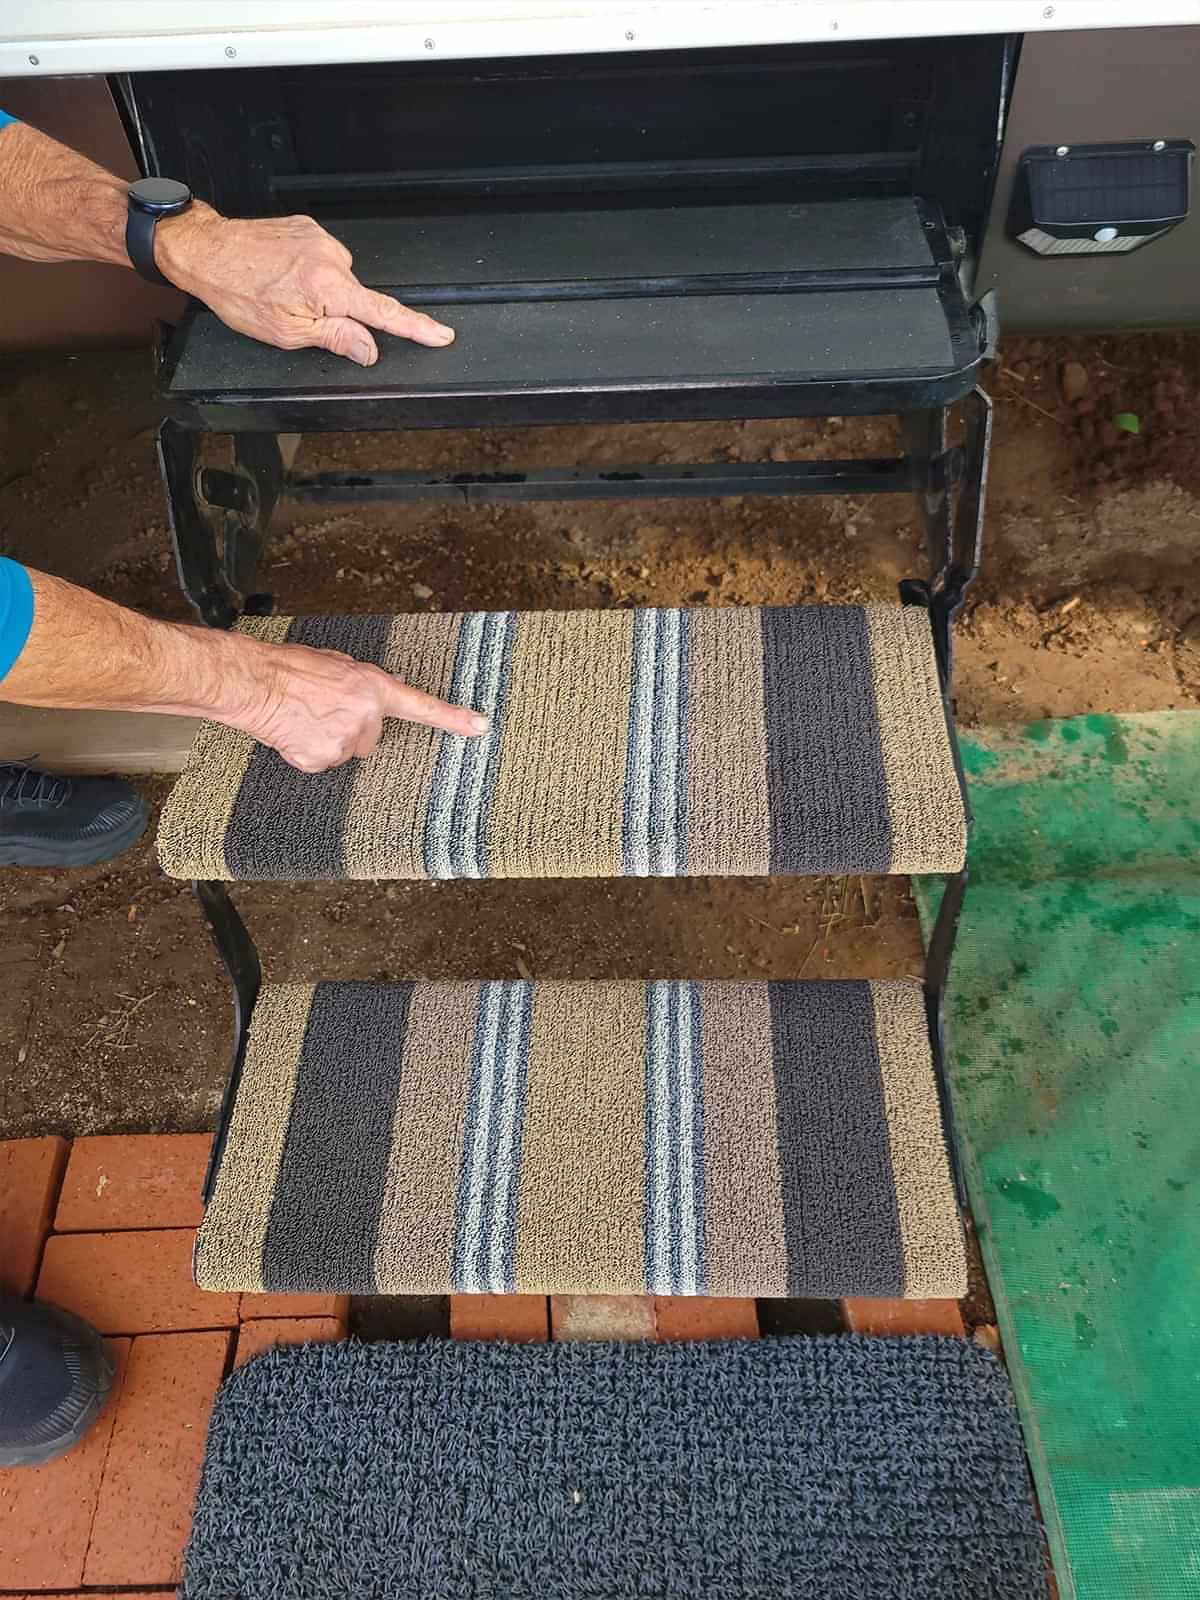 an RV's entry way steps with new ShadePro RV Step covers, save for the first step